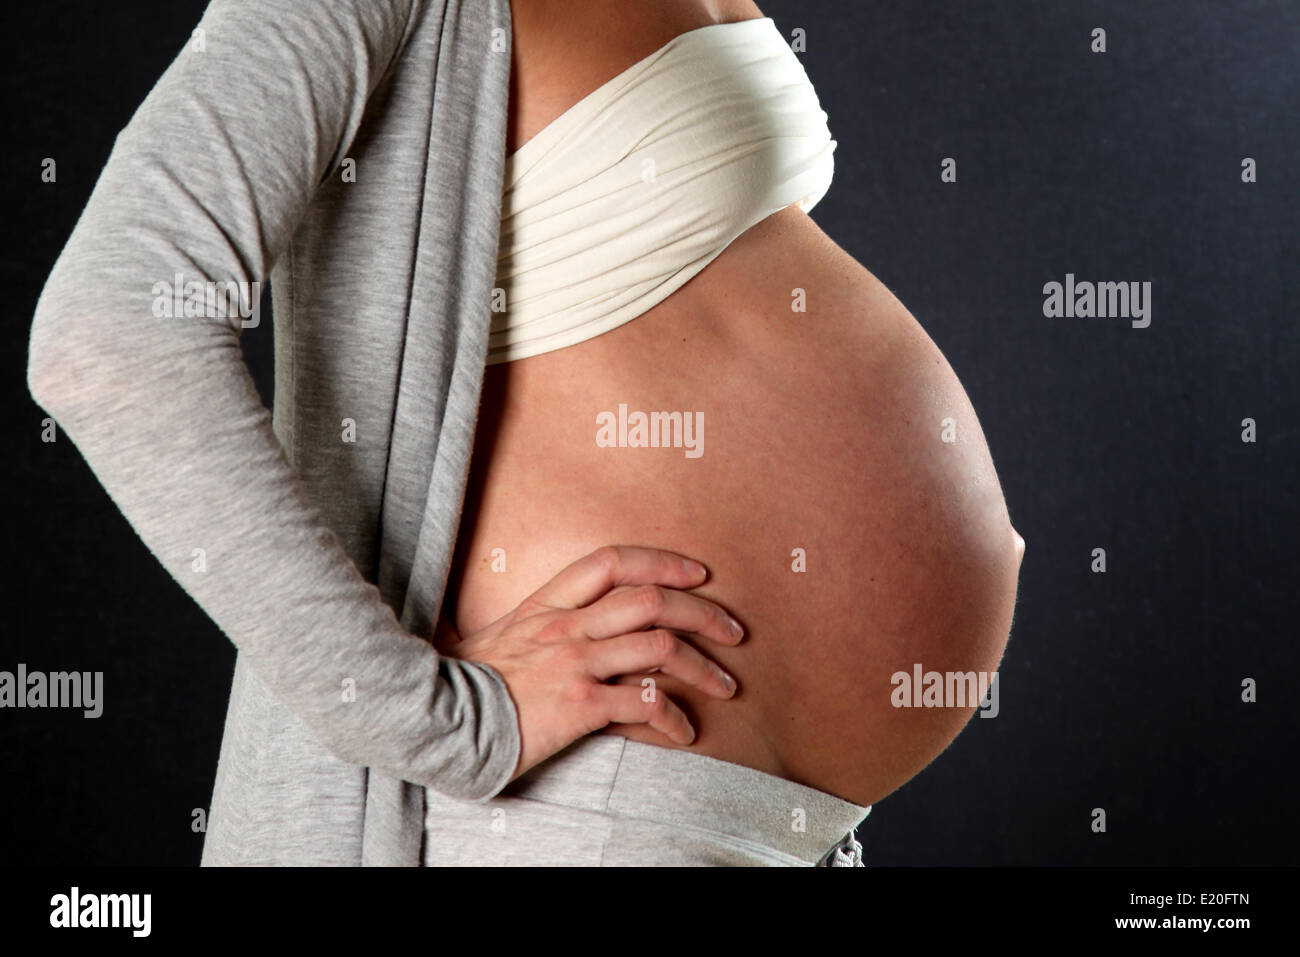 Belly of a pregnant woman Stock Photo